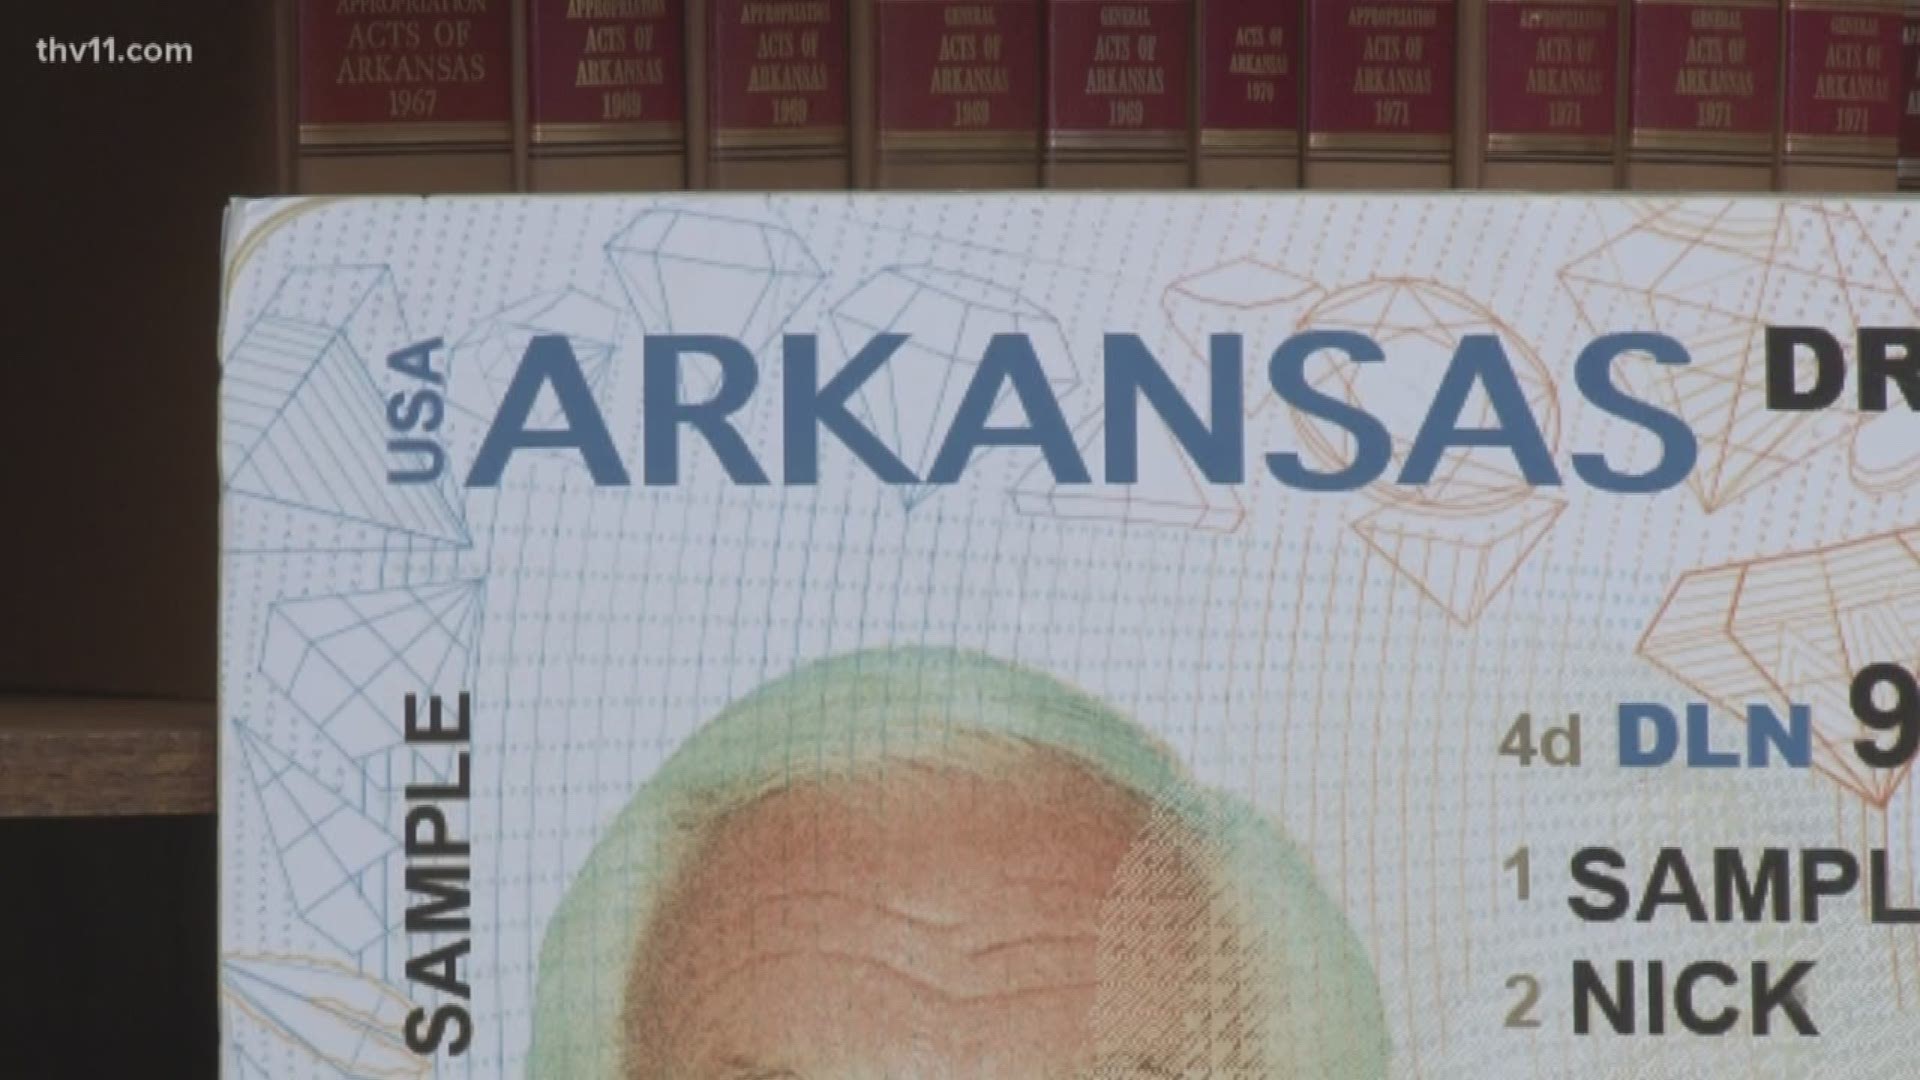 There's a lot of confusion and questions surrounding Real IDs in Arkansas and what it means for your driver's license.